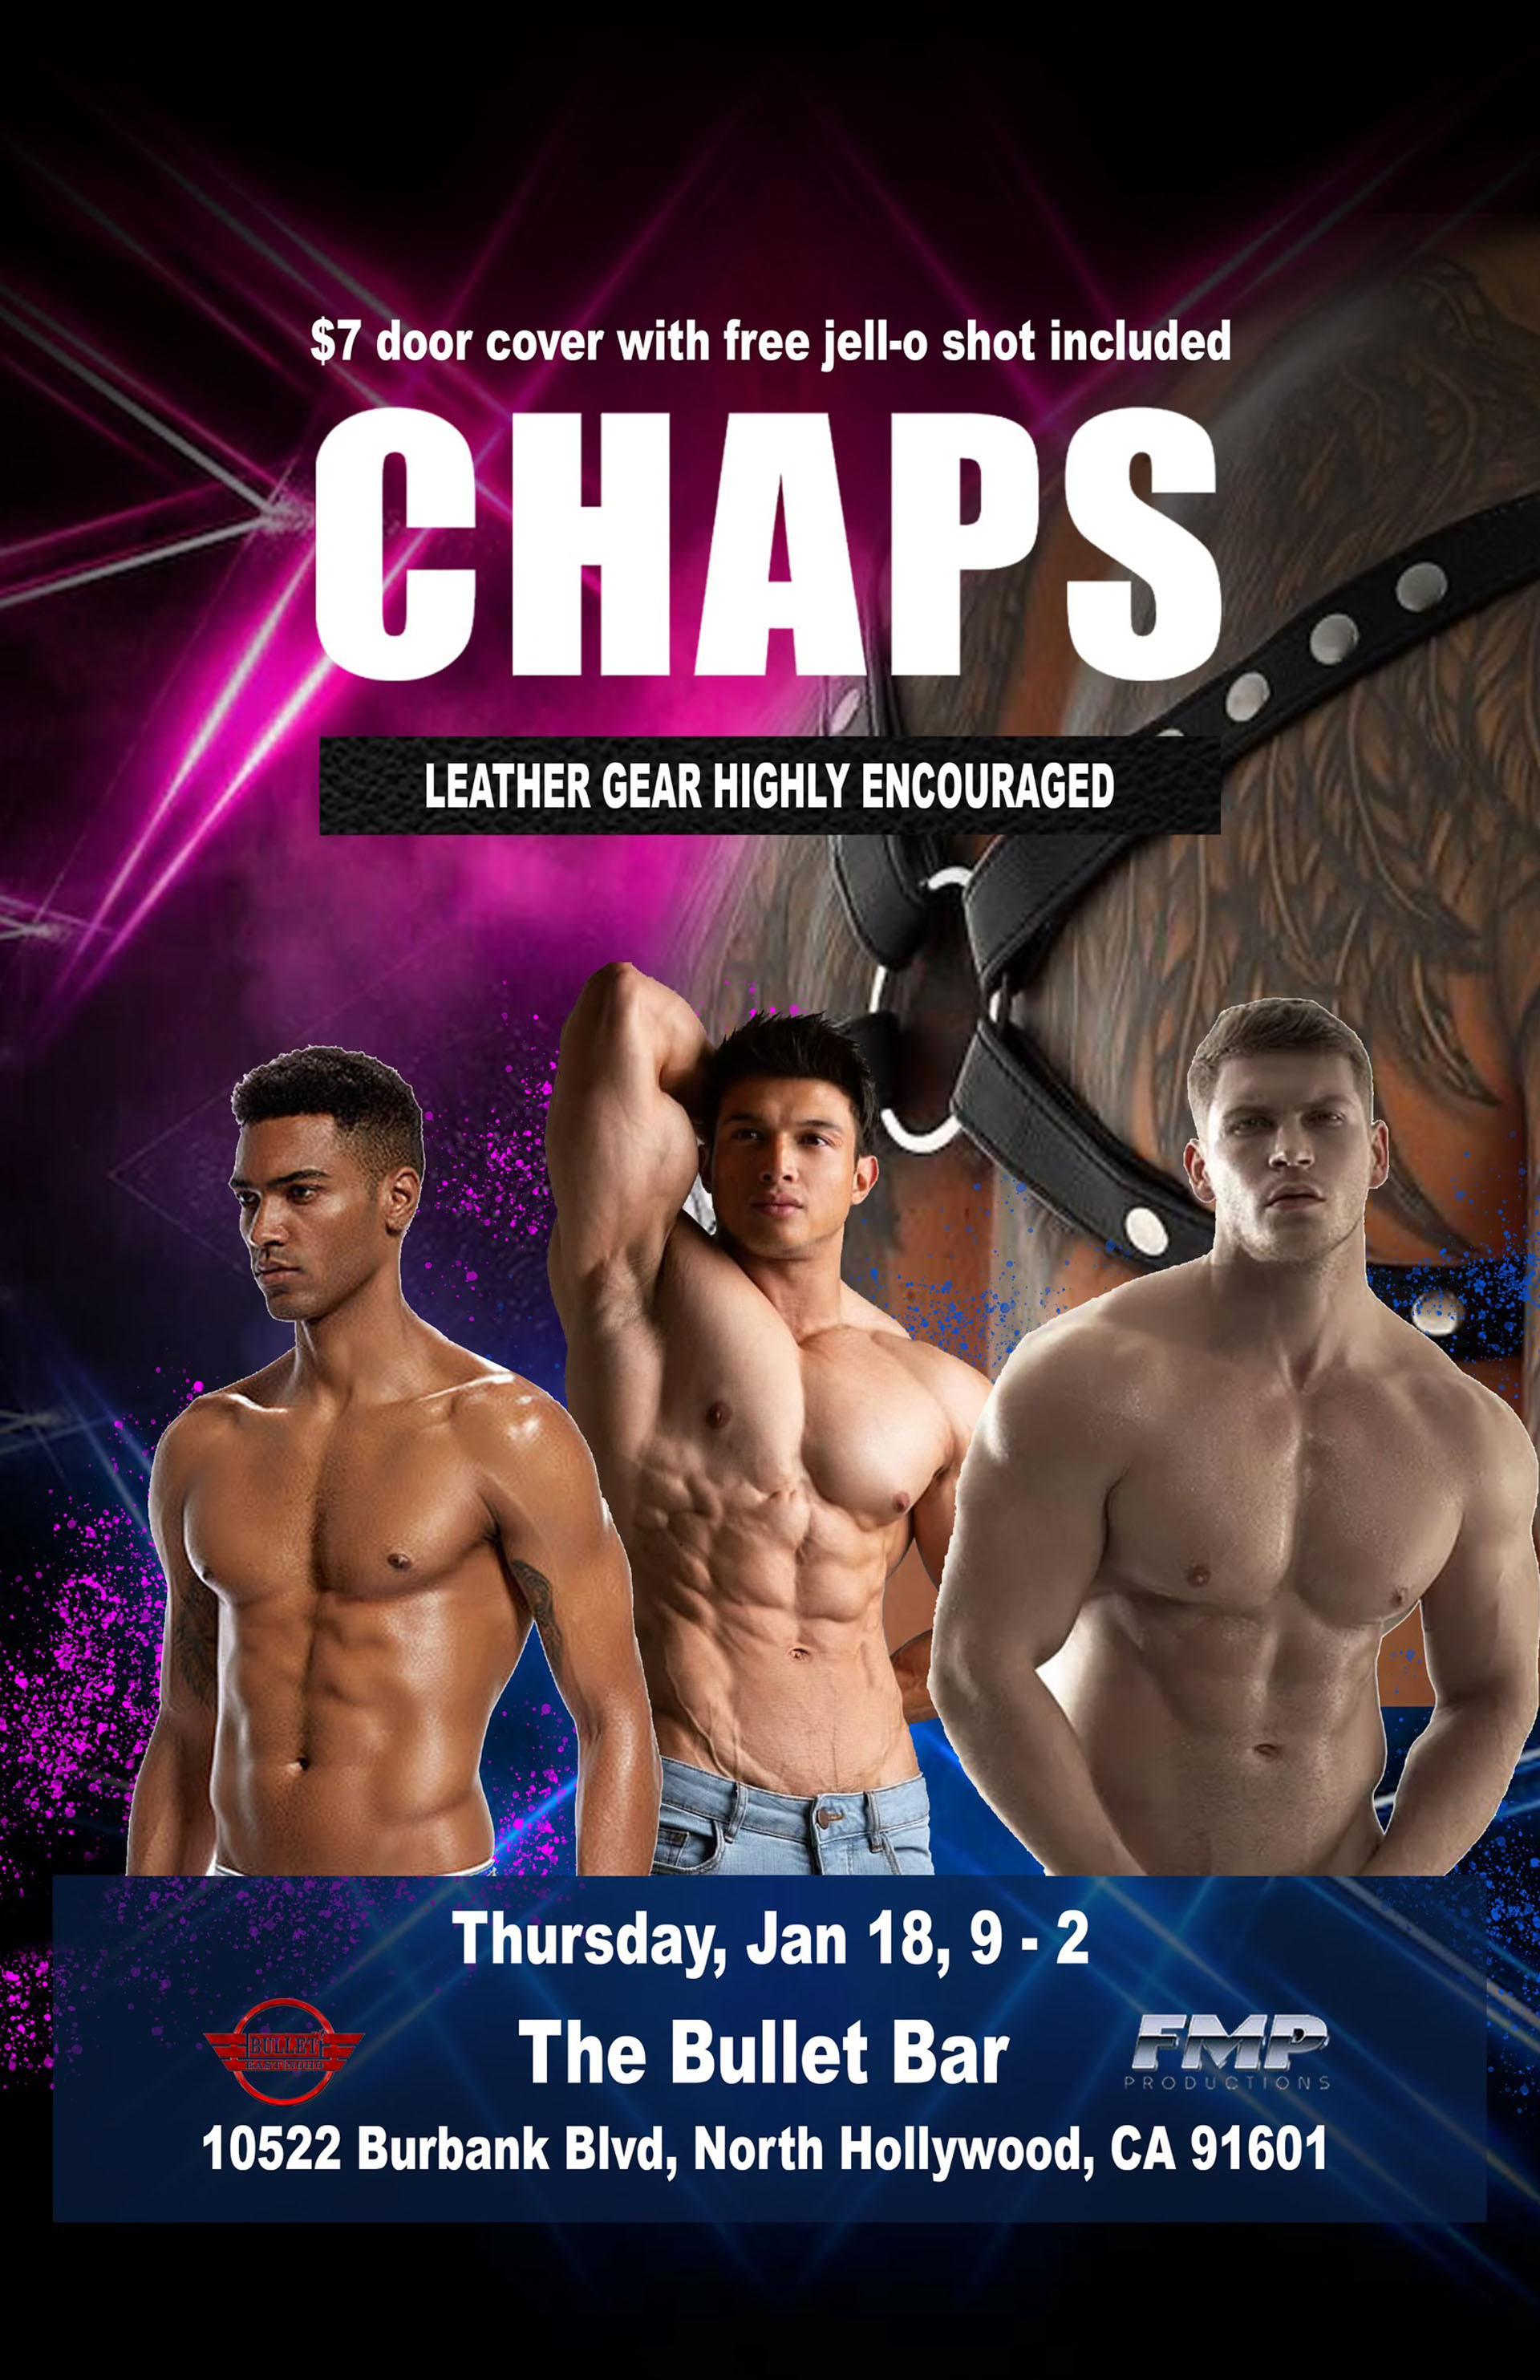 THE BULLET BAR and FMP PRODUCTIONS Present CHAPS: Thursday, 01/18/24 from 9:00 PM to 2:00 AM! $7 door cover with FREE JELL-O SHOT included... Leather gear highly encouraged.